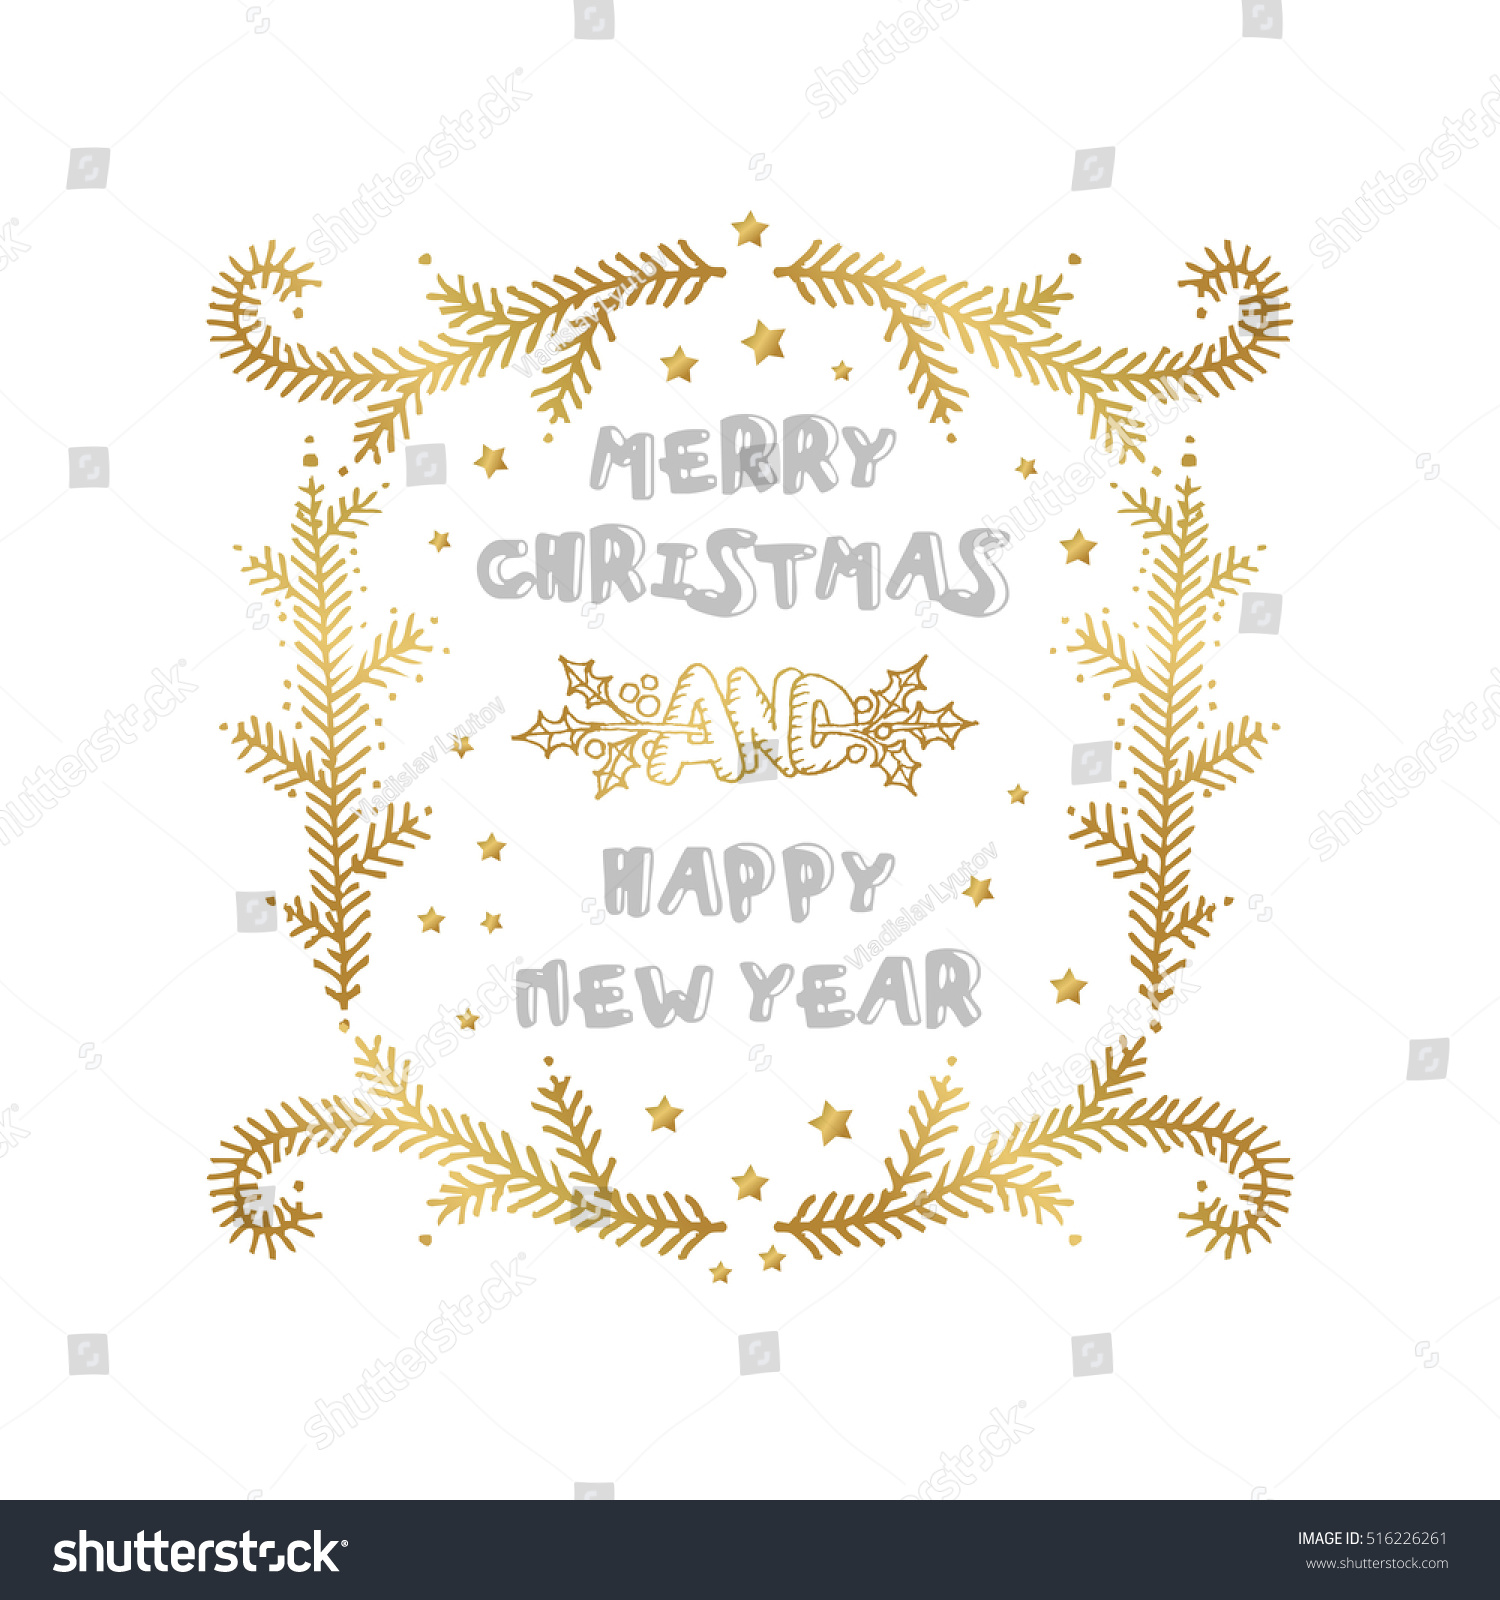 Merry Christmas And Happy New Year Words On White Background Stock Vector 516226261 : Shutterstock